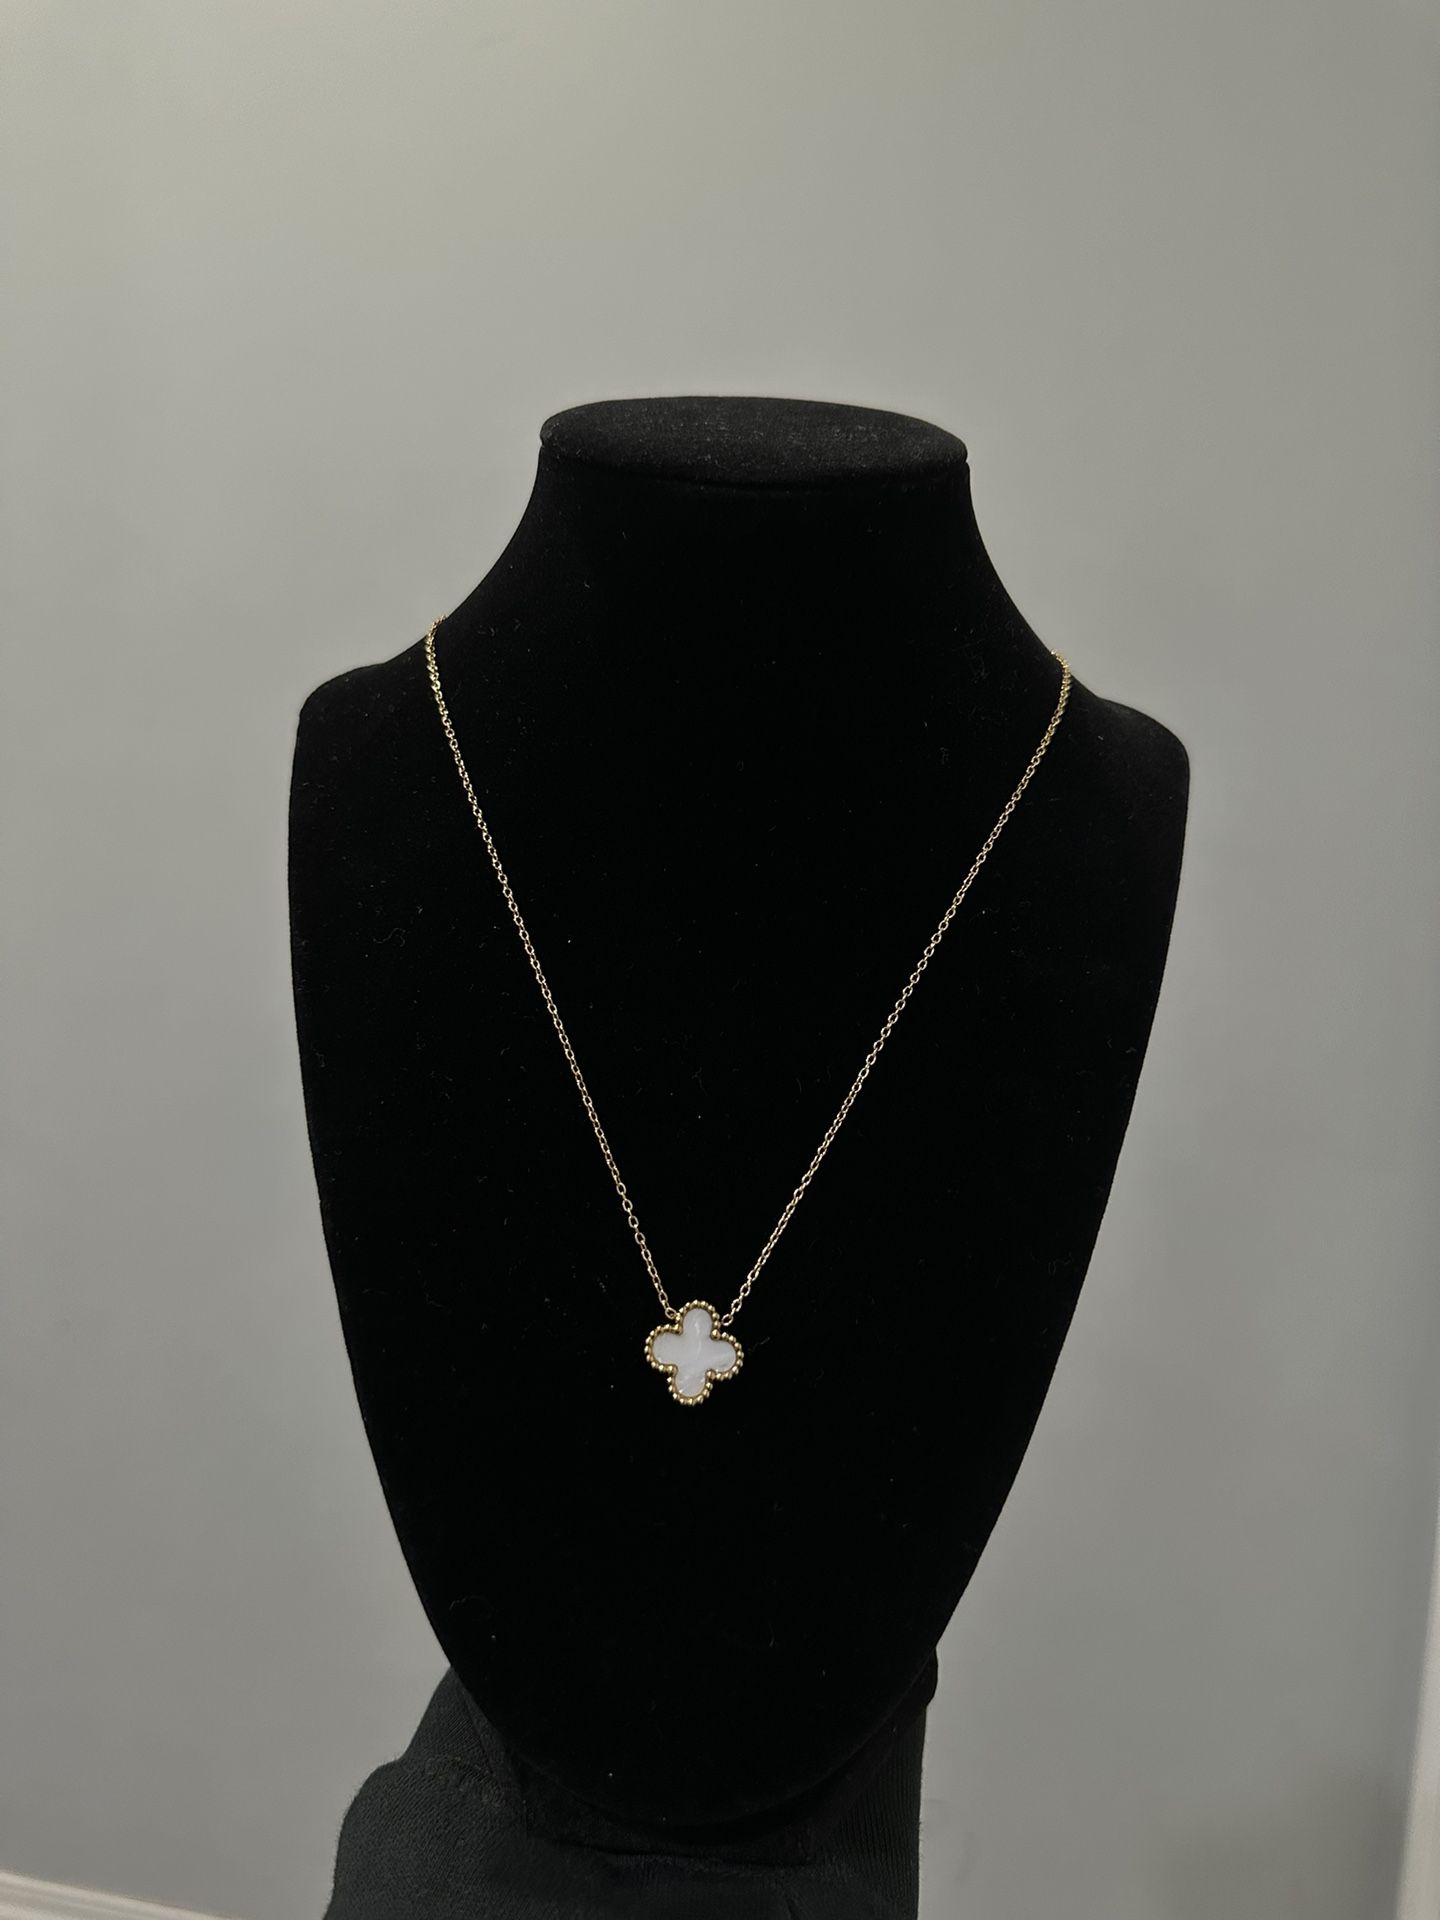 VAN CLEEF COVER NECKLACE DUPE WHITE